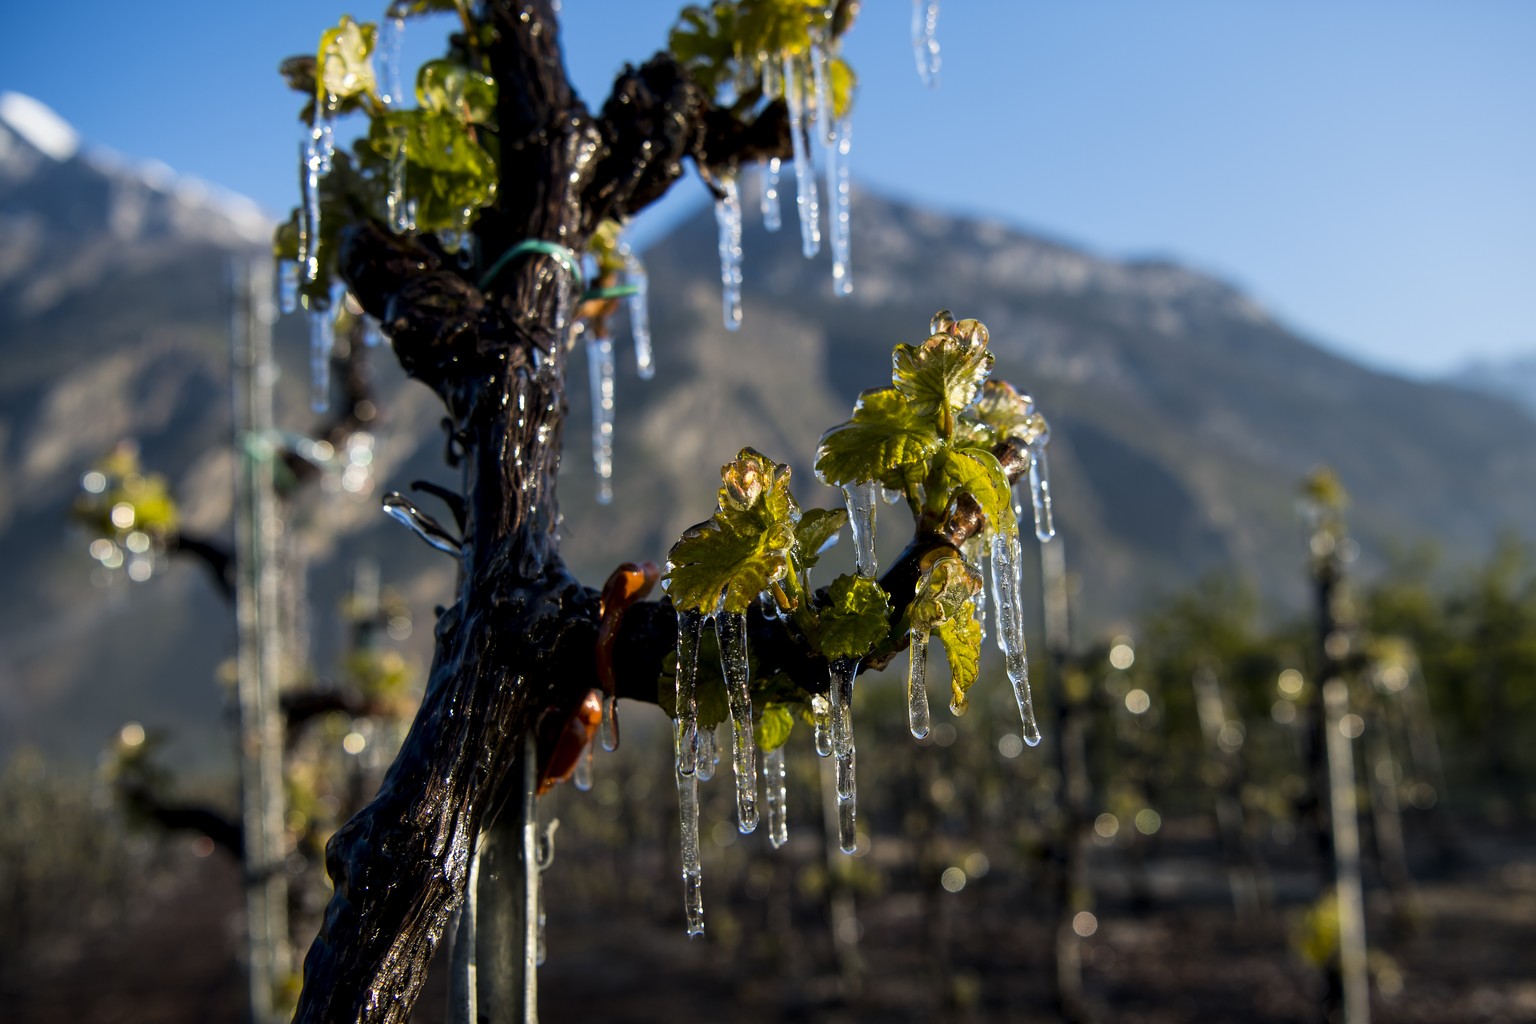 Water is sprayed in a vineyard to protect blooming buds with a thin layer of ice, in the middle of the Swiss Alps mountains, in Saxon, Canton of Valais, Switzerland, Thursday, April 20, 2017. Due to u ...